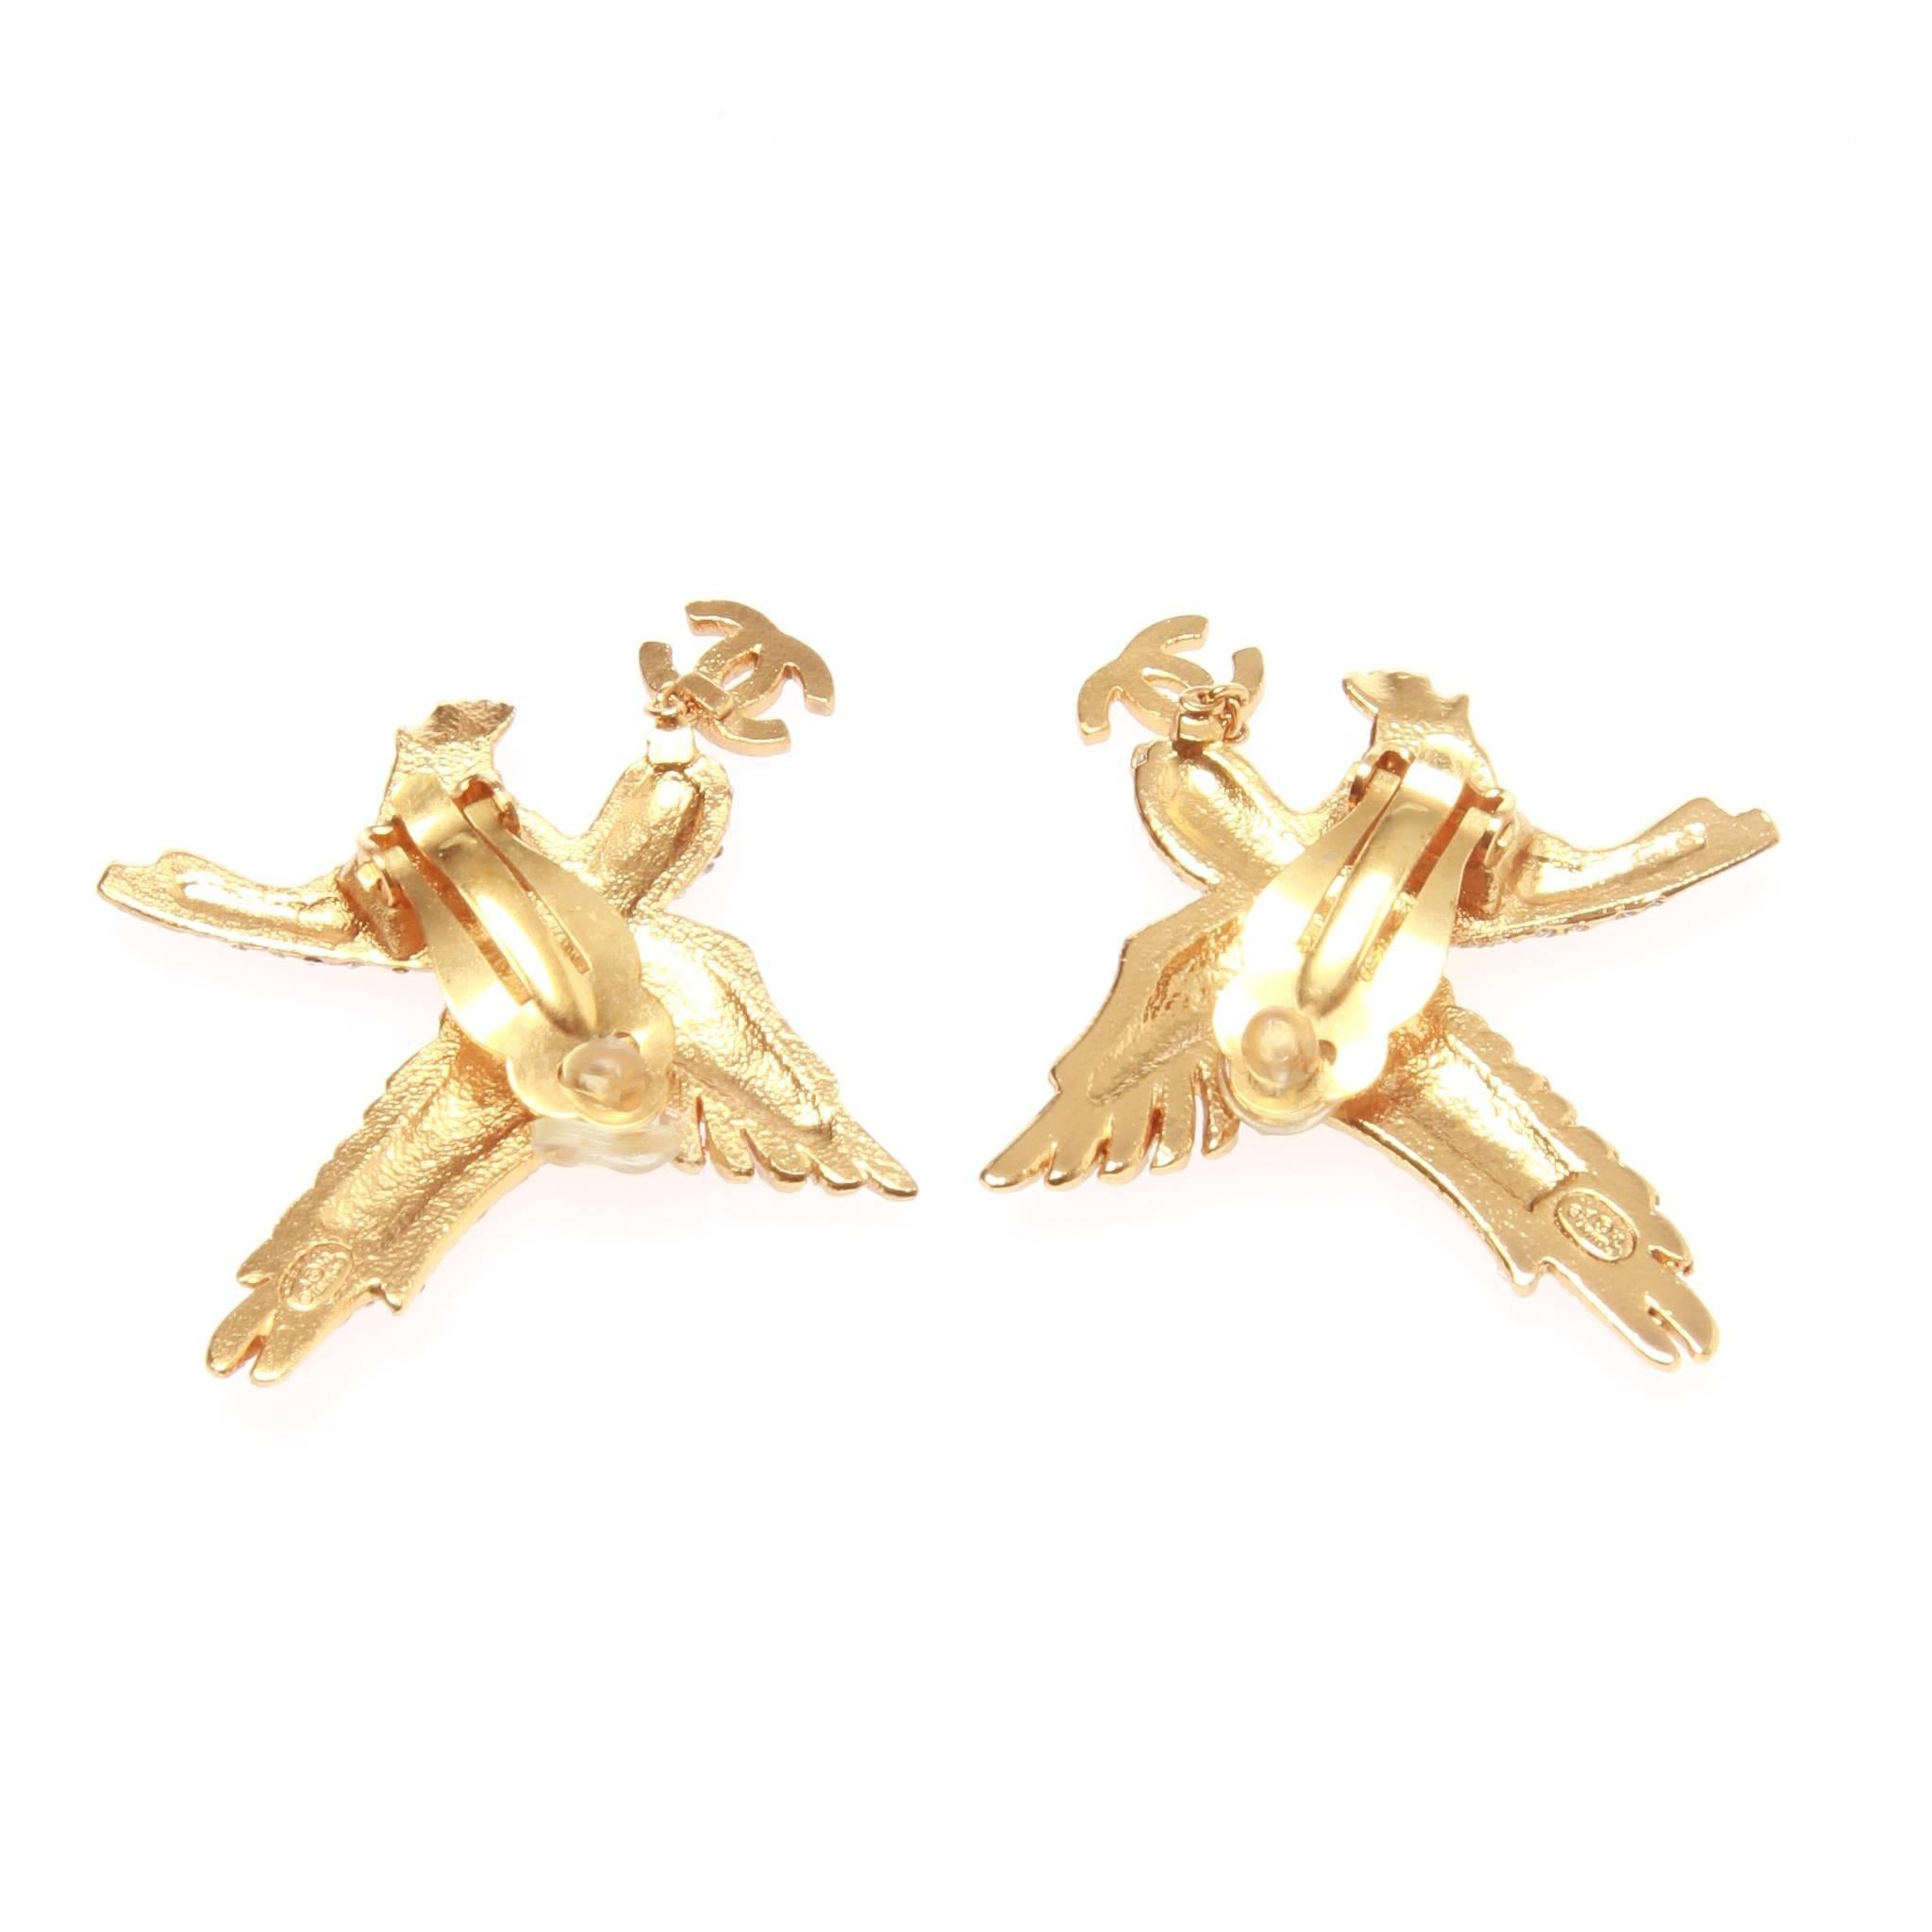 Chanel clip-on earrings featuring sparkling Swarovski crystals with a gold tone metal. Each eagle has a CC 